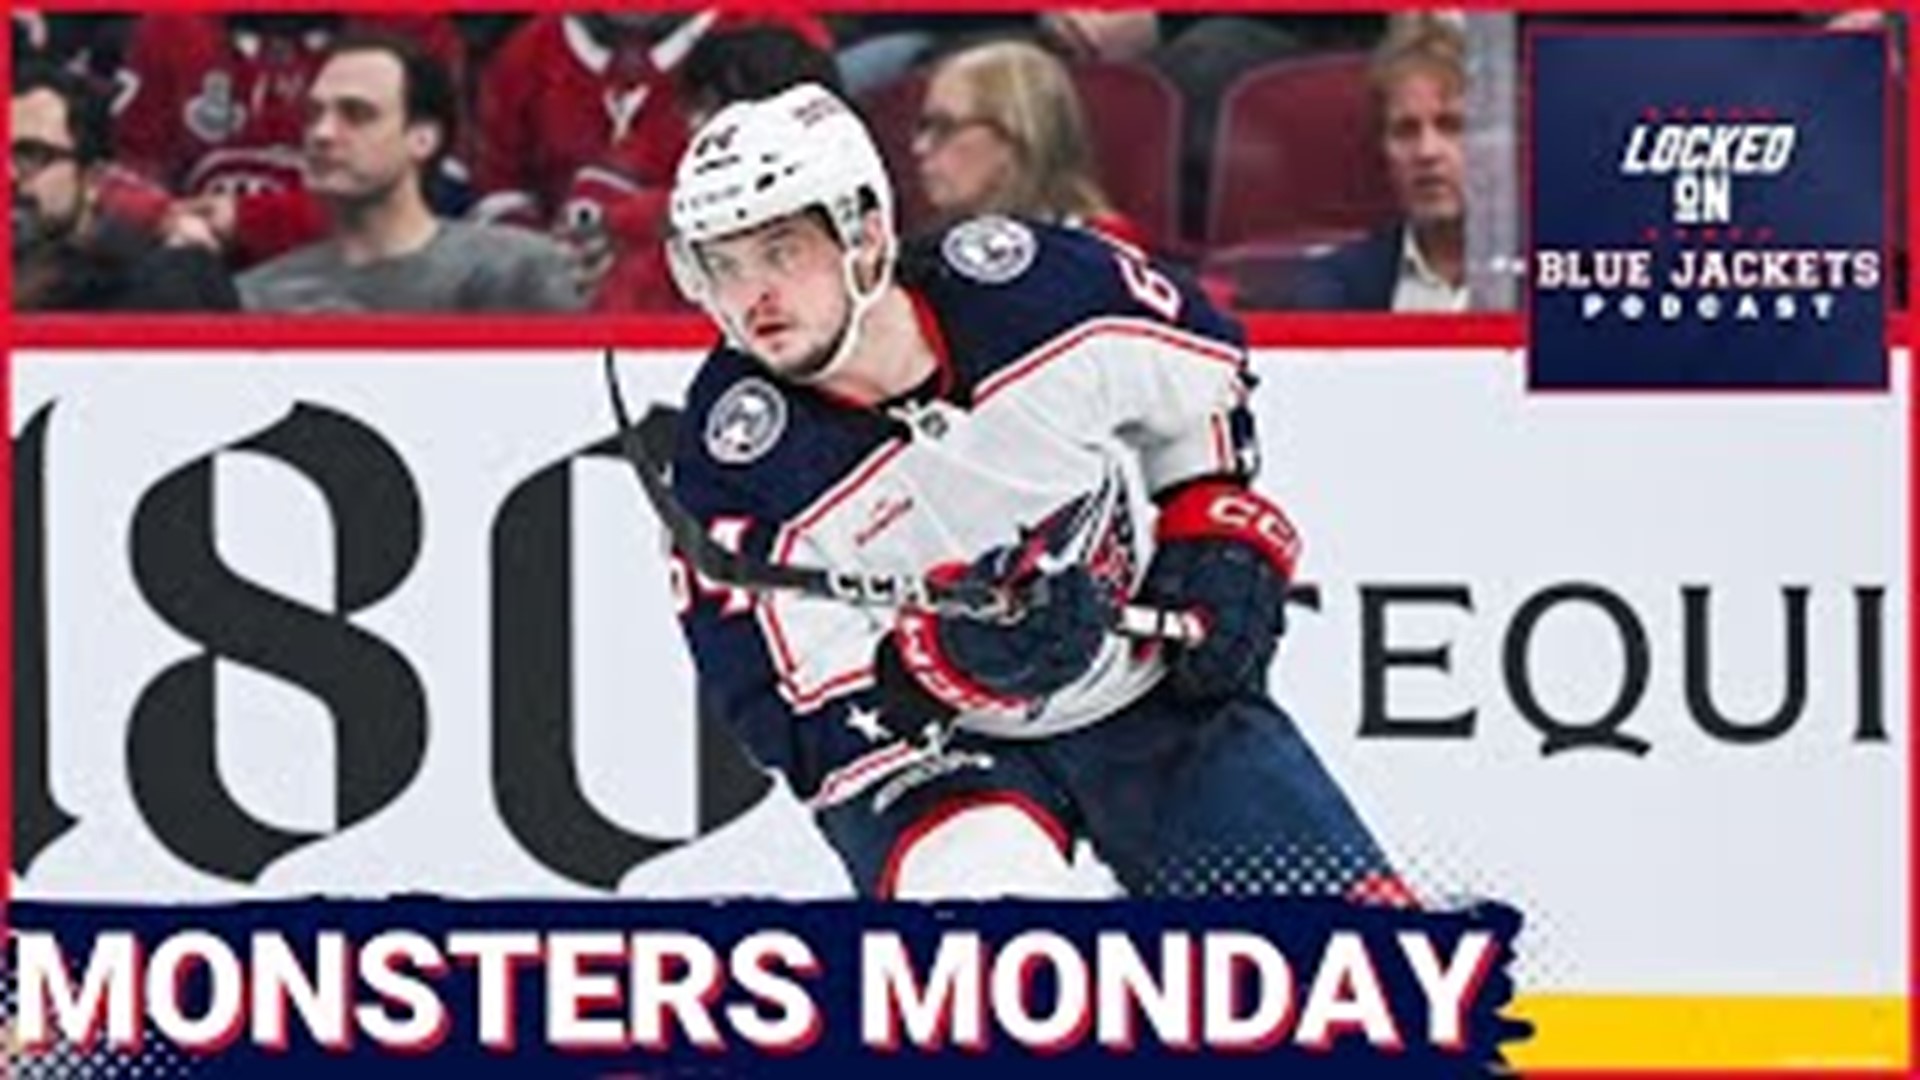 It's a Monsters Monday and a double episode day here at Locked On Blue Jackets! Deana Weinheimer of the Calder Times is here and we're checking in with the Monsters.